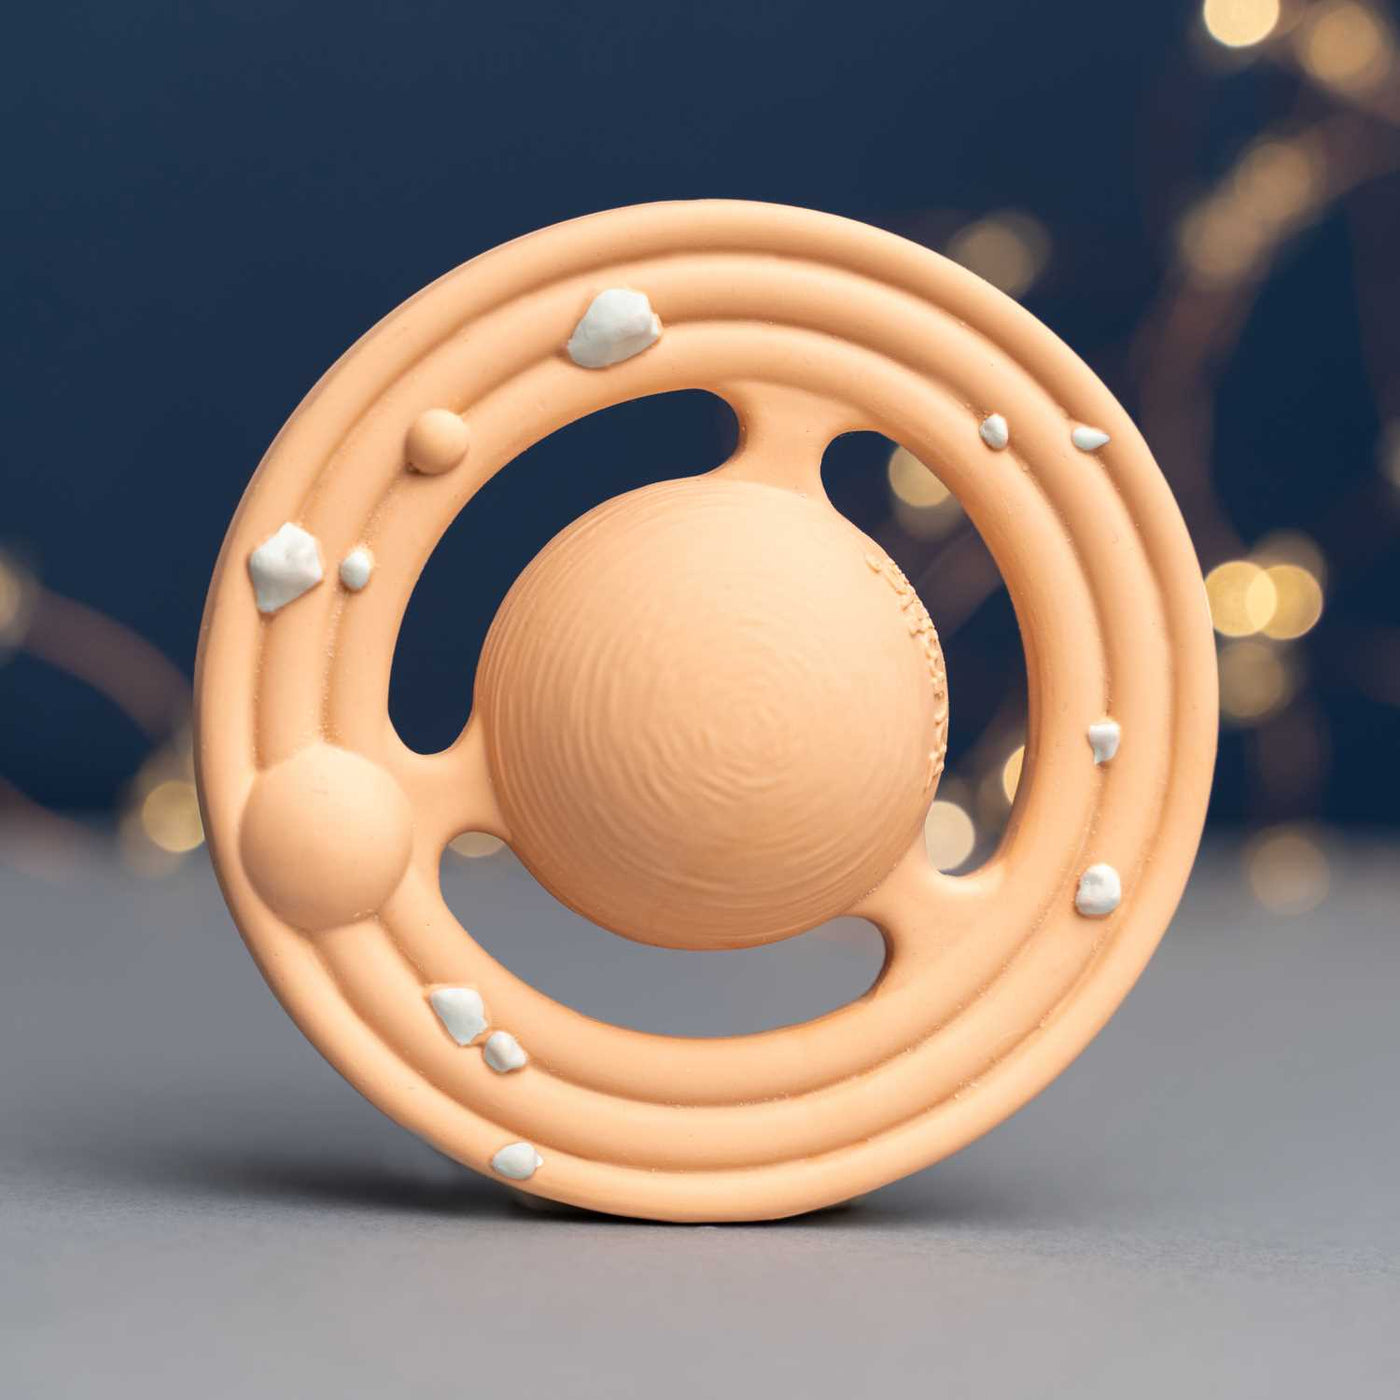 Peach Planet CH3W planet shaped teether with life like rocks to soothe sore teething gums